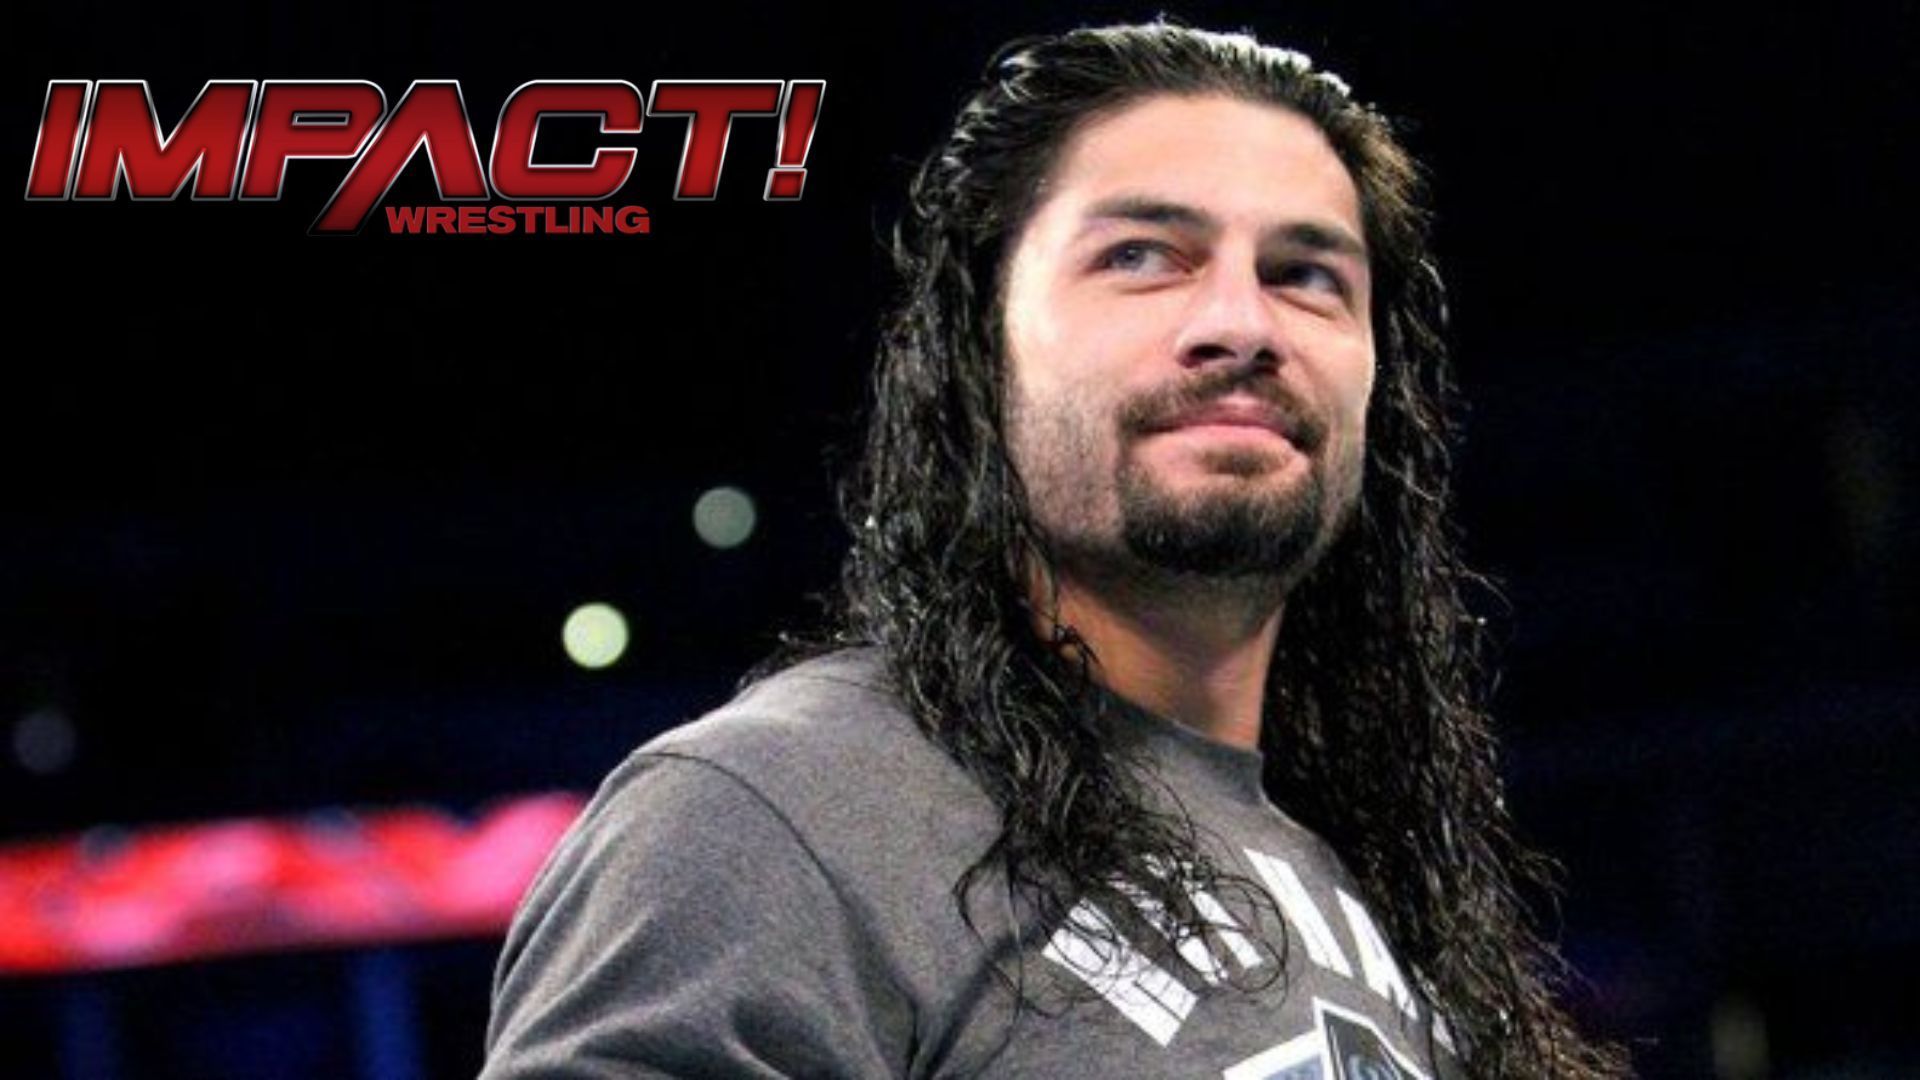 A few wrestlers related to Roman Reigns fought at Impact Wrestling